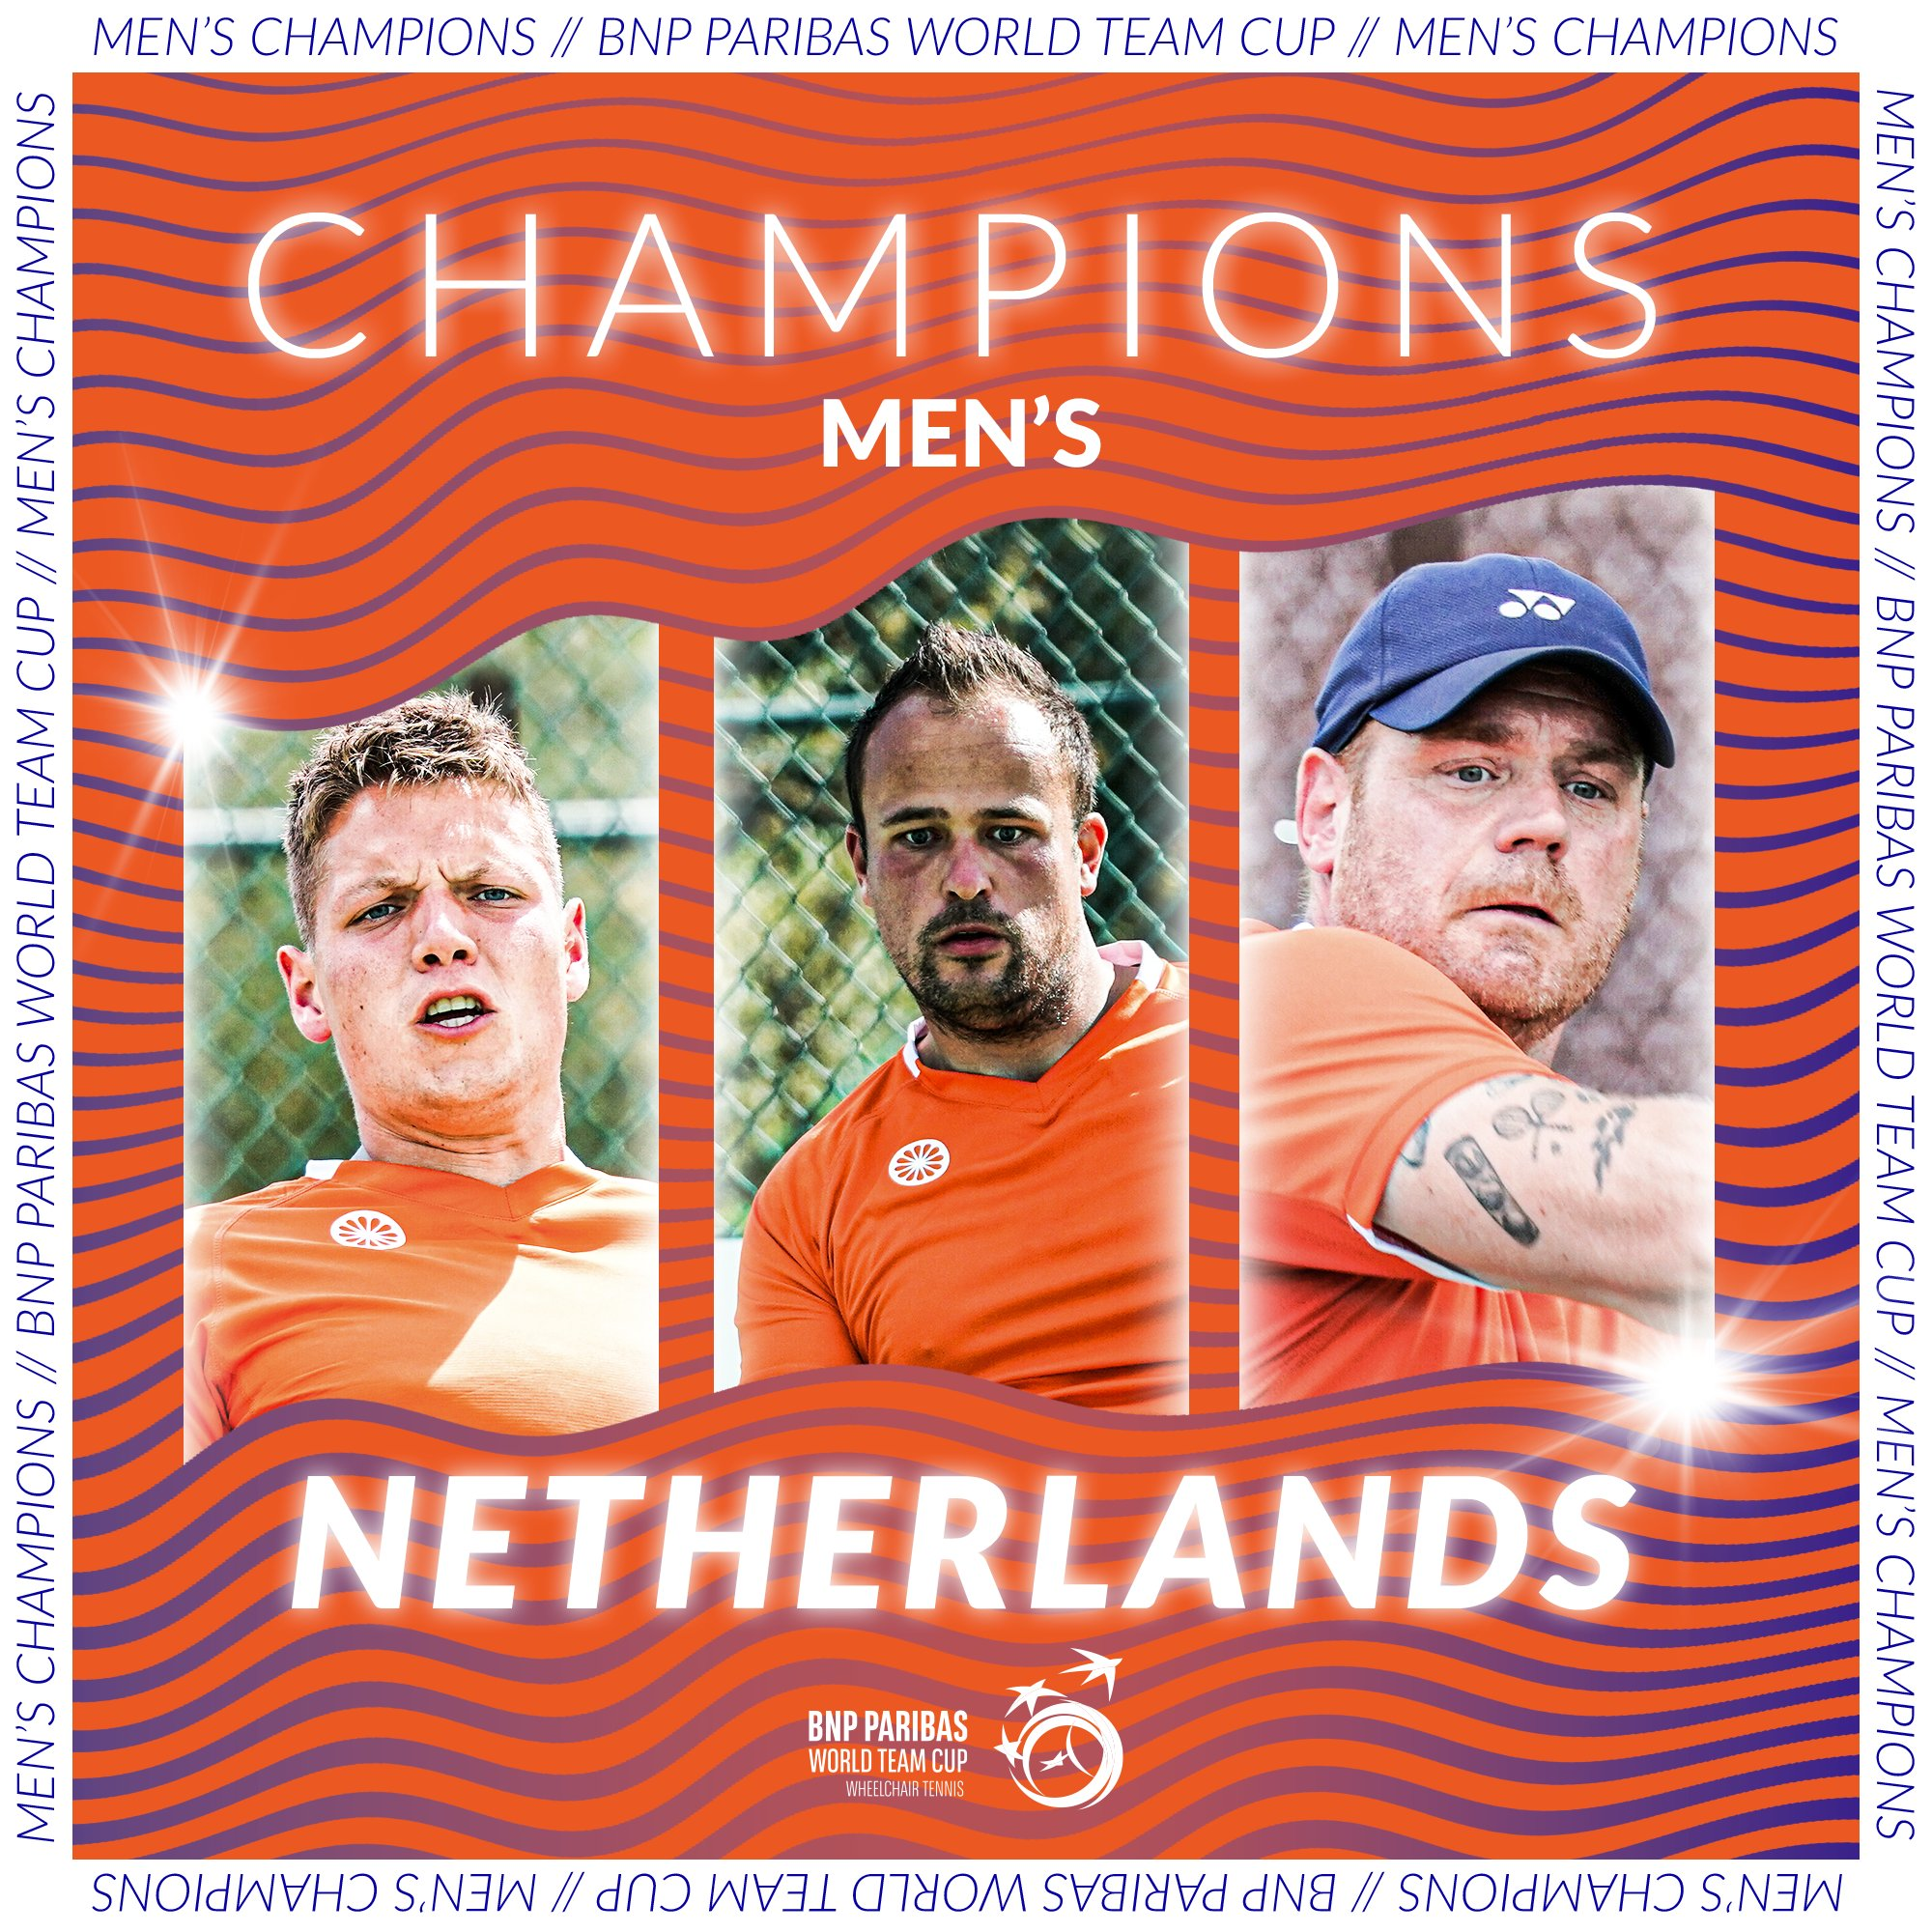 The Netherlands earned victory in the men's competition ©ITF